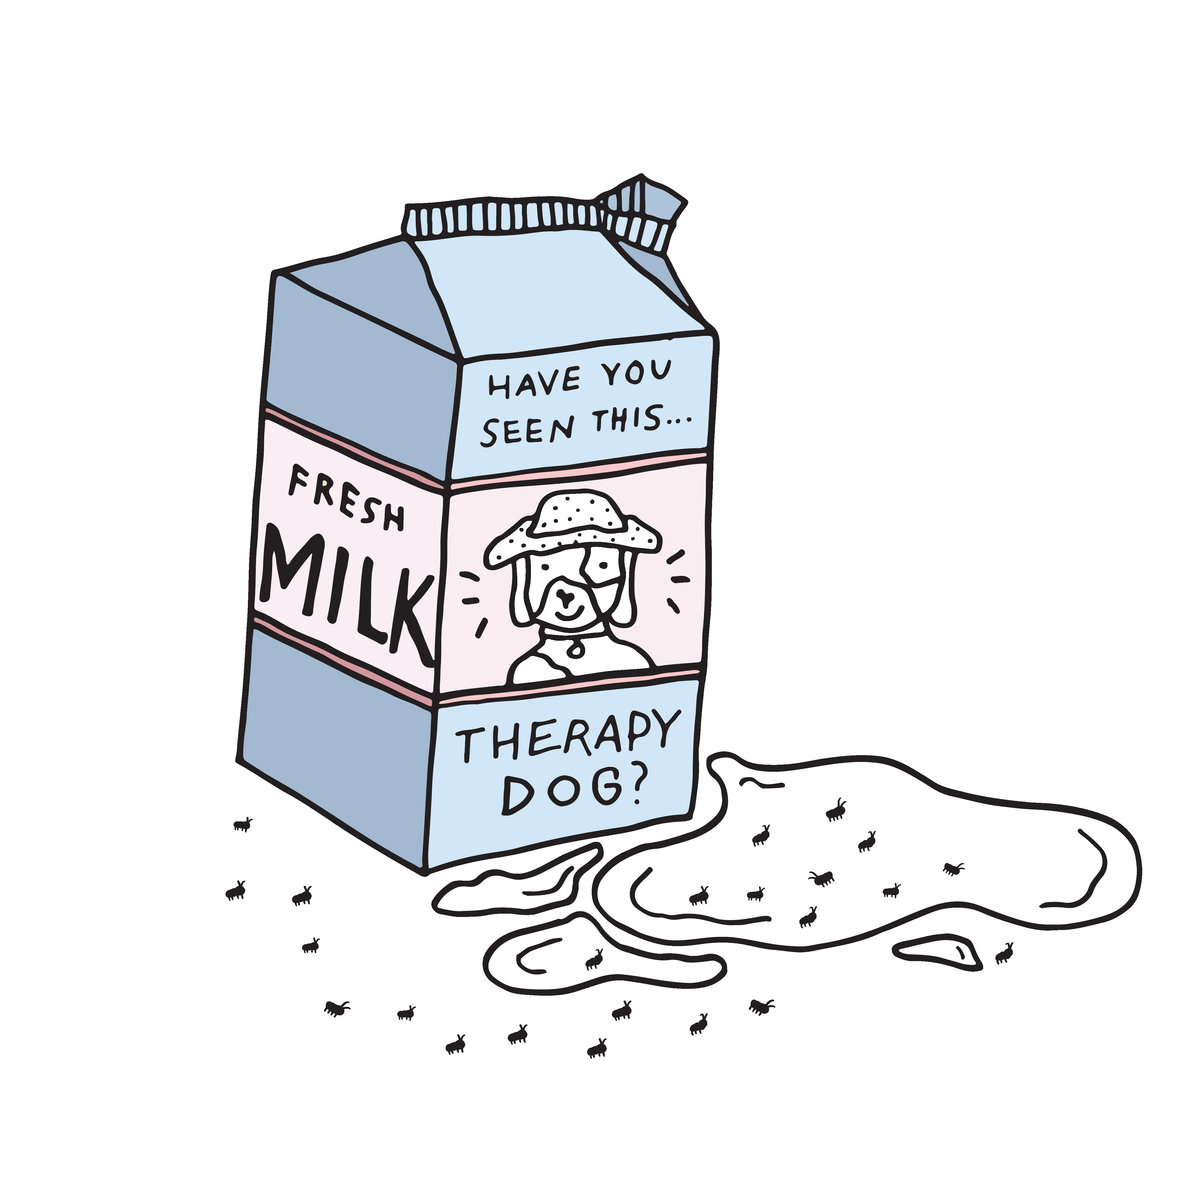 Therapy Dog – “Spilling Milk”